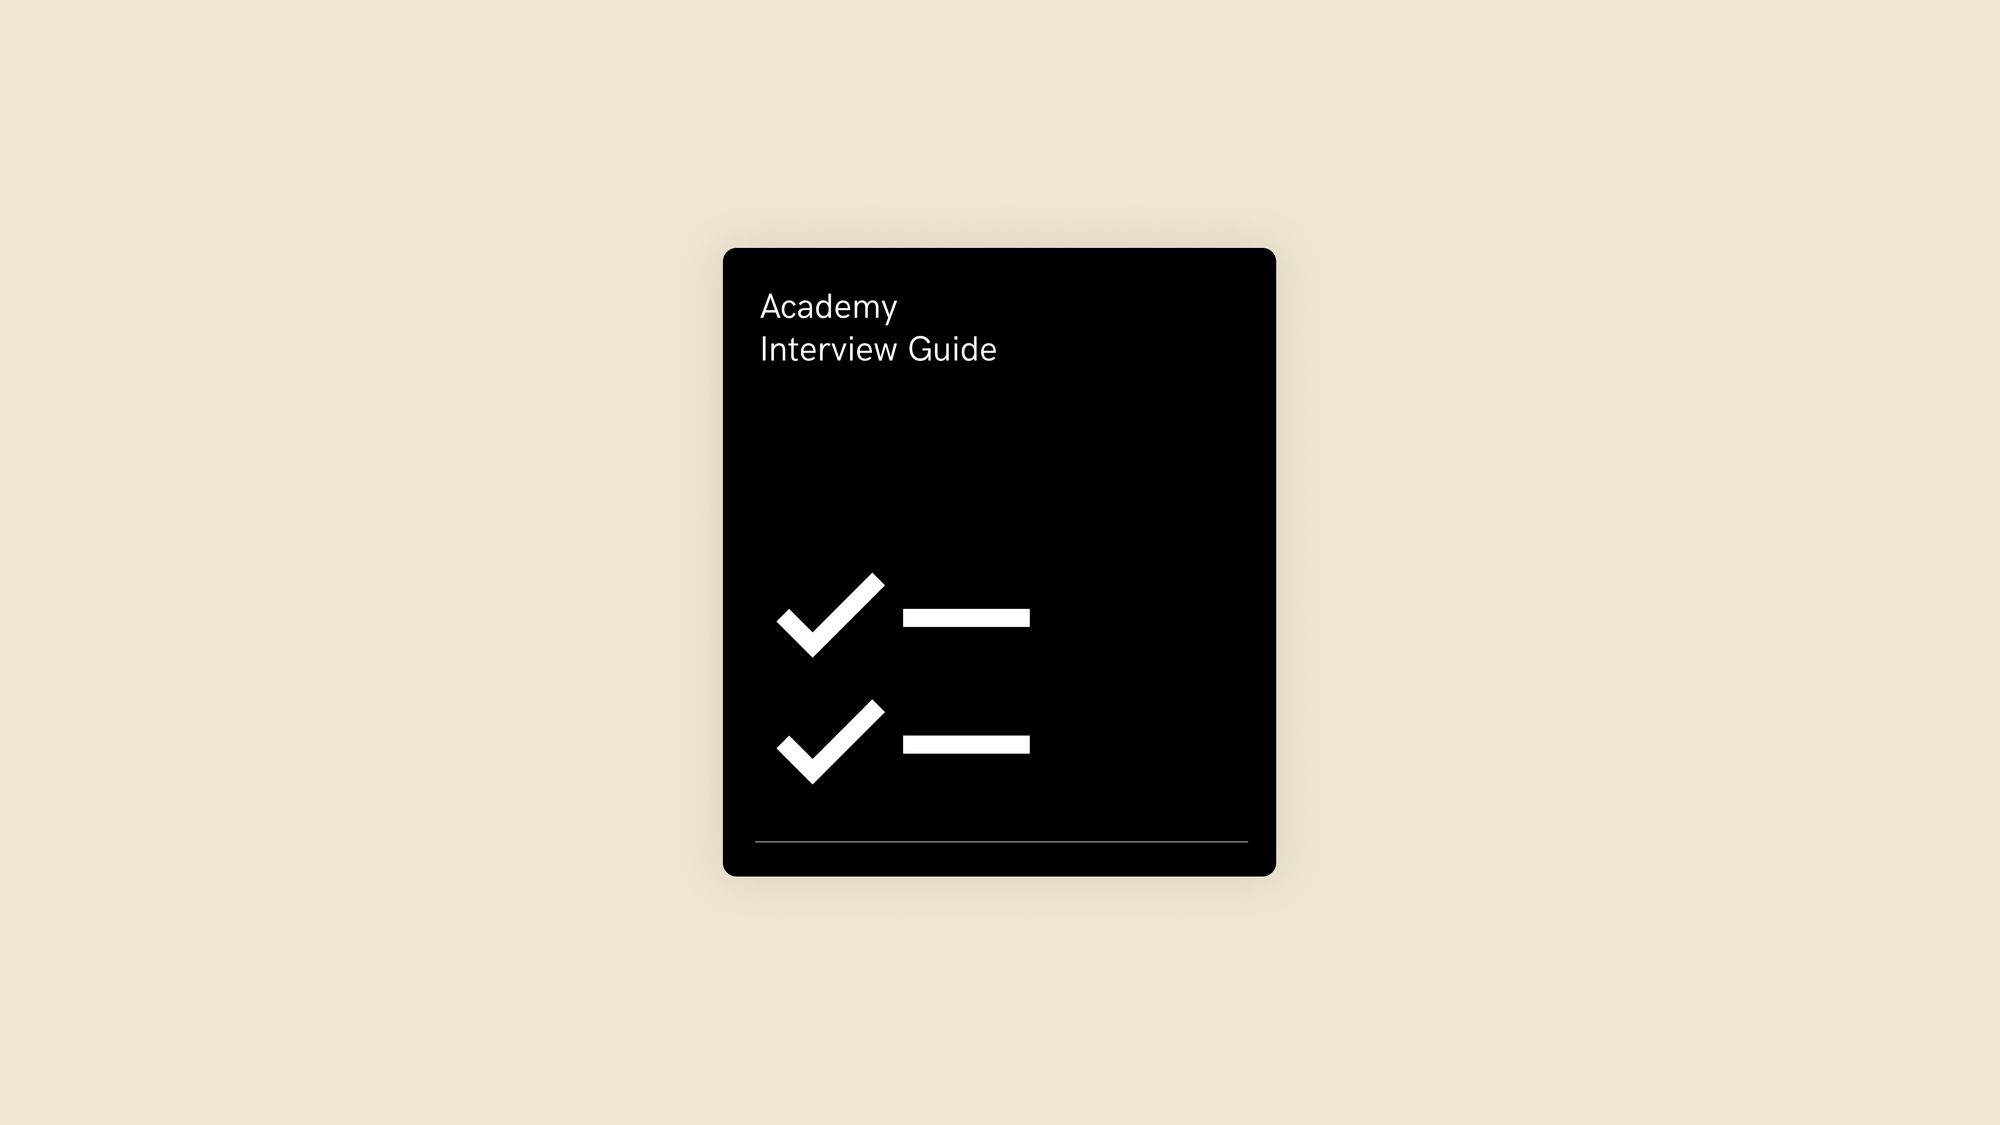 An Image of a guidebook cover that says Interview Guide